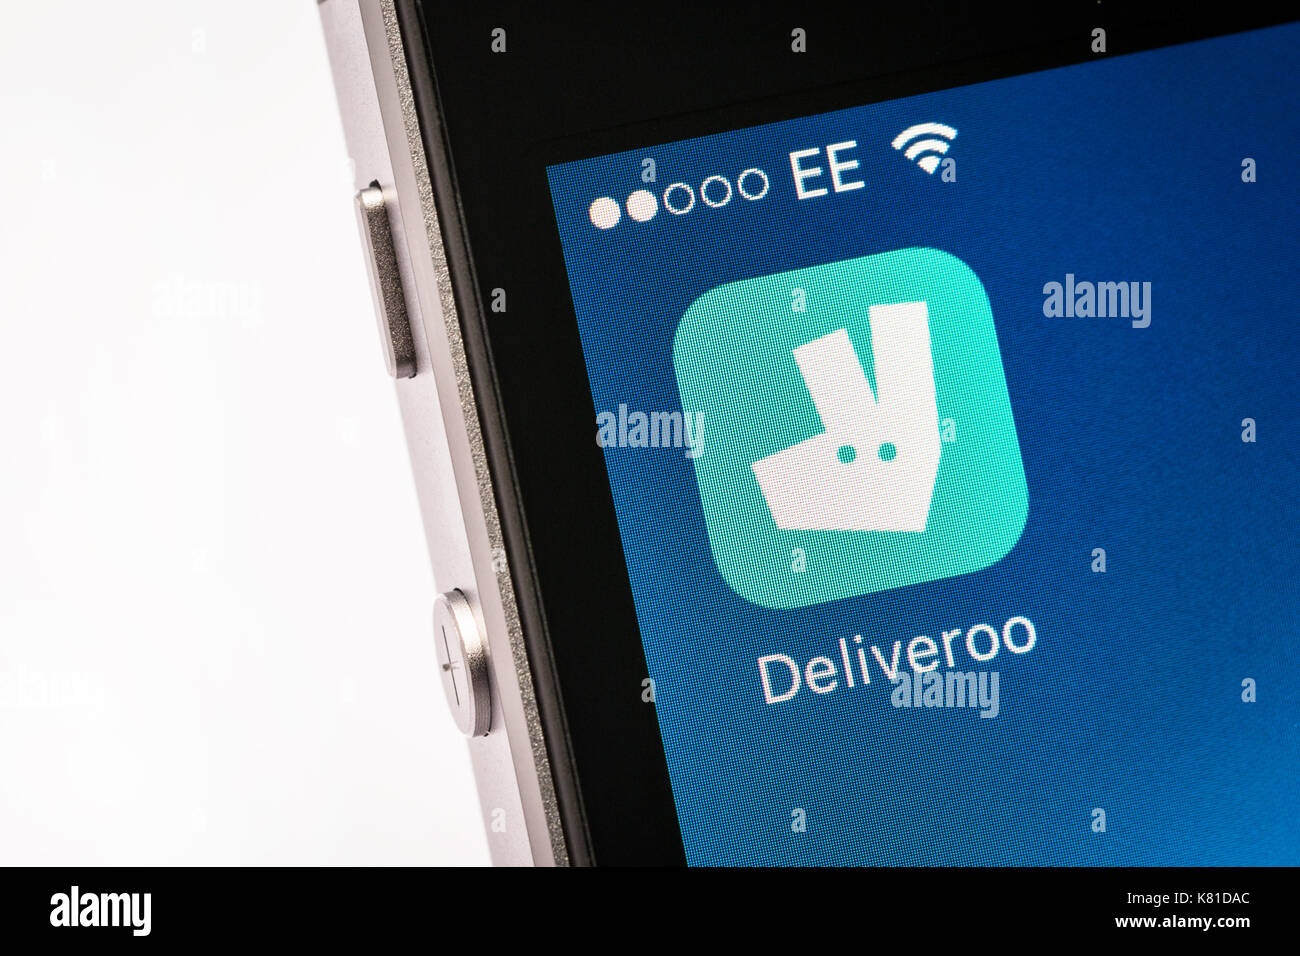 Deliveroo App on an iPhone mobile phone Stock Photo